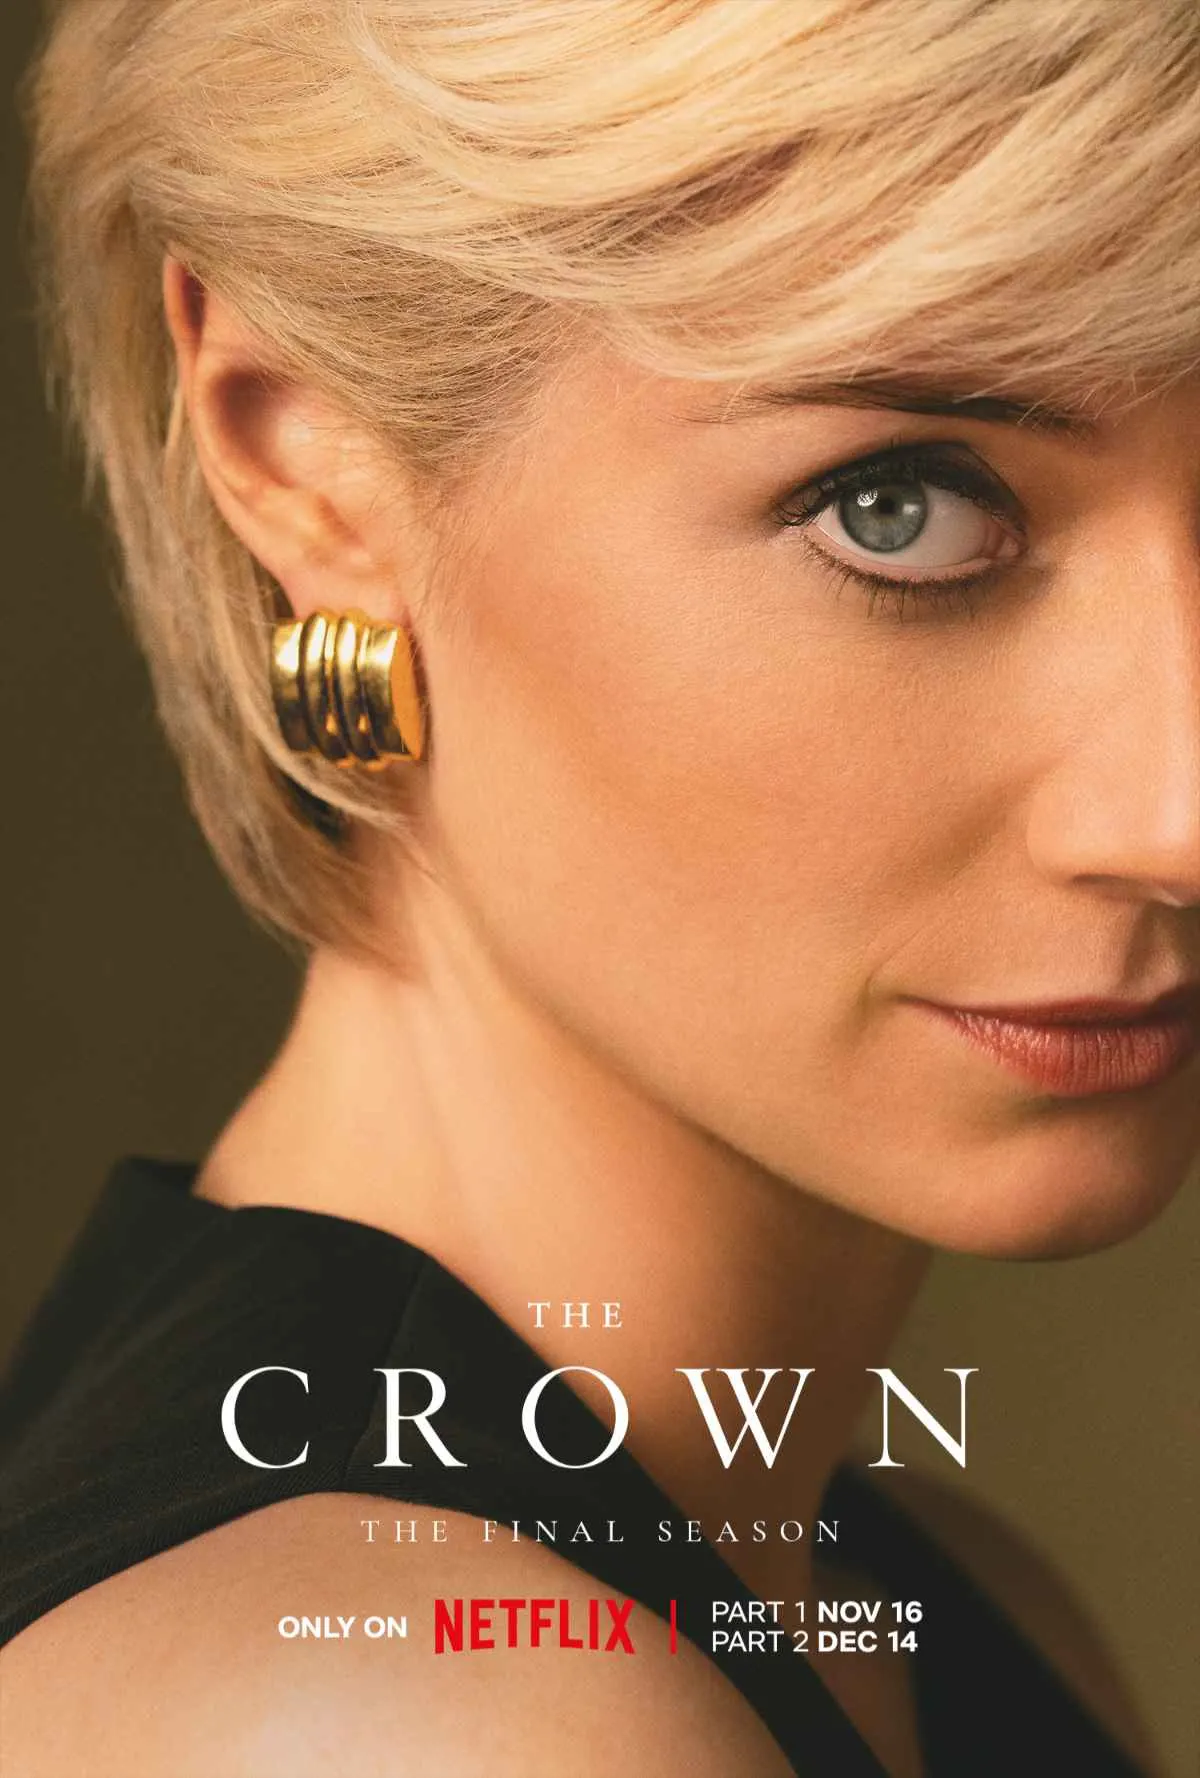 Final Season of The Crown Reveals New Trailer